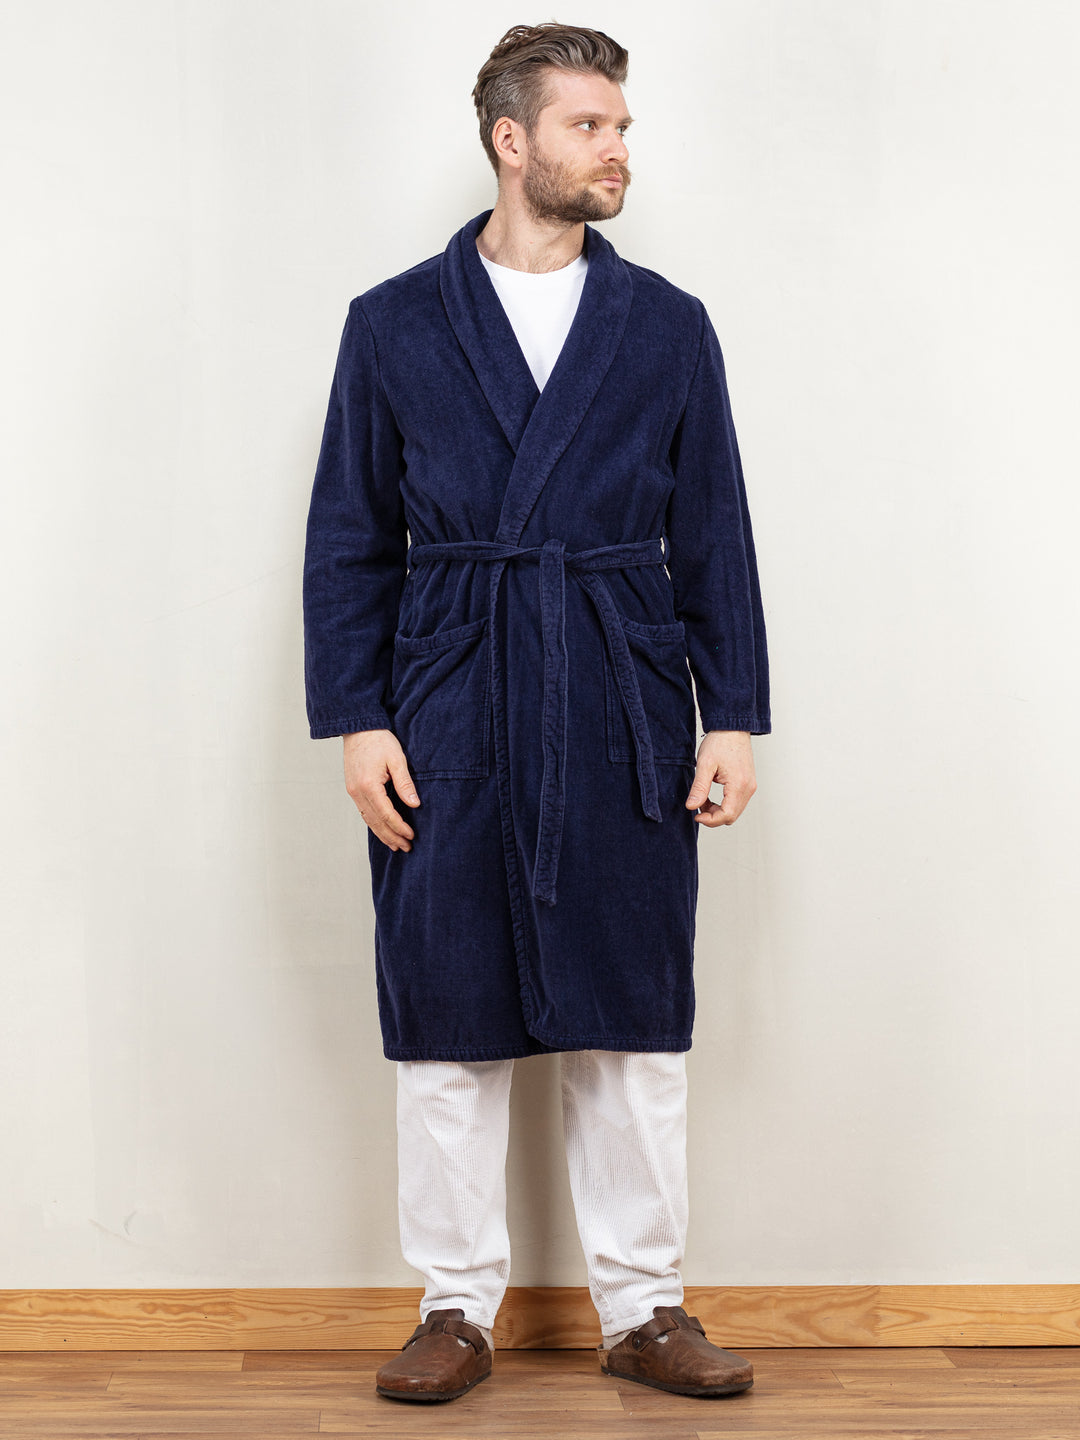 Men Dressing Gown vintage 90's morning robe bathrobe navy terry cotton wrap belted hugh hefner gift for him birthday size extra large XL